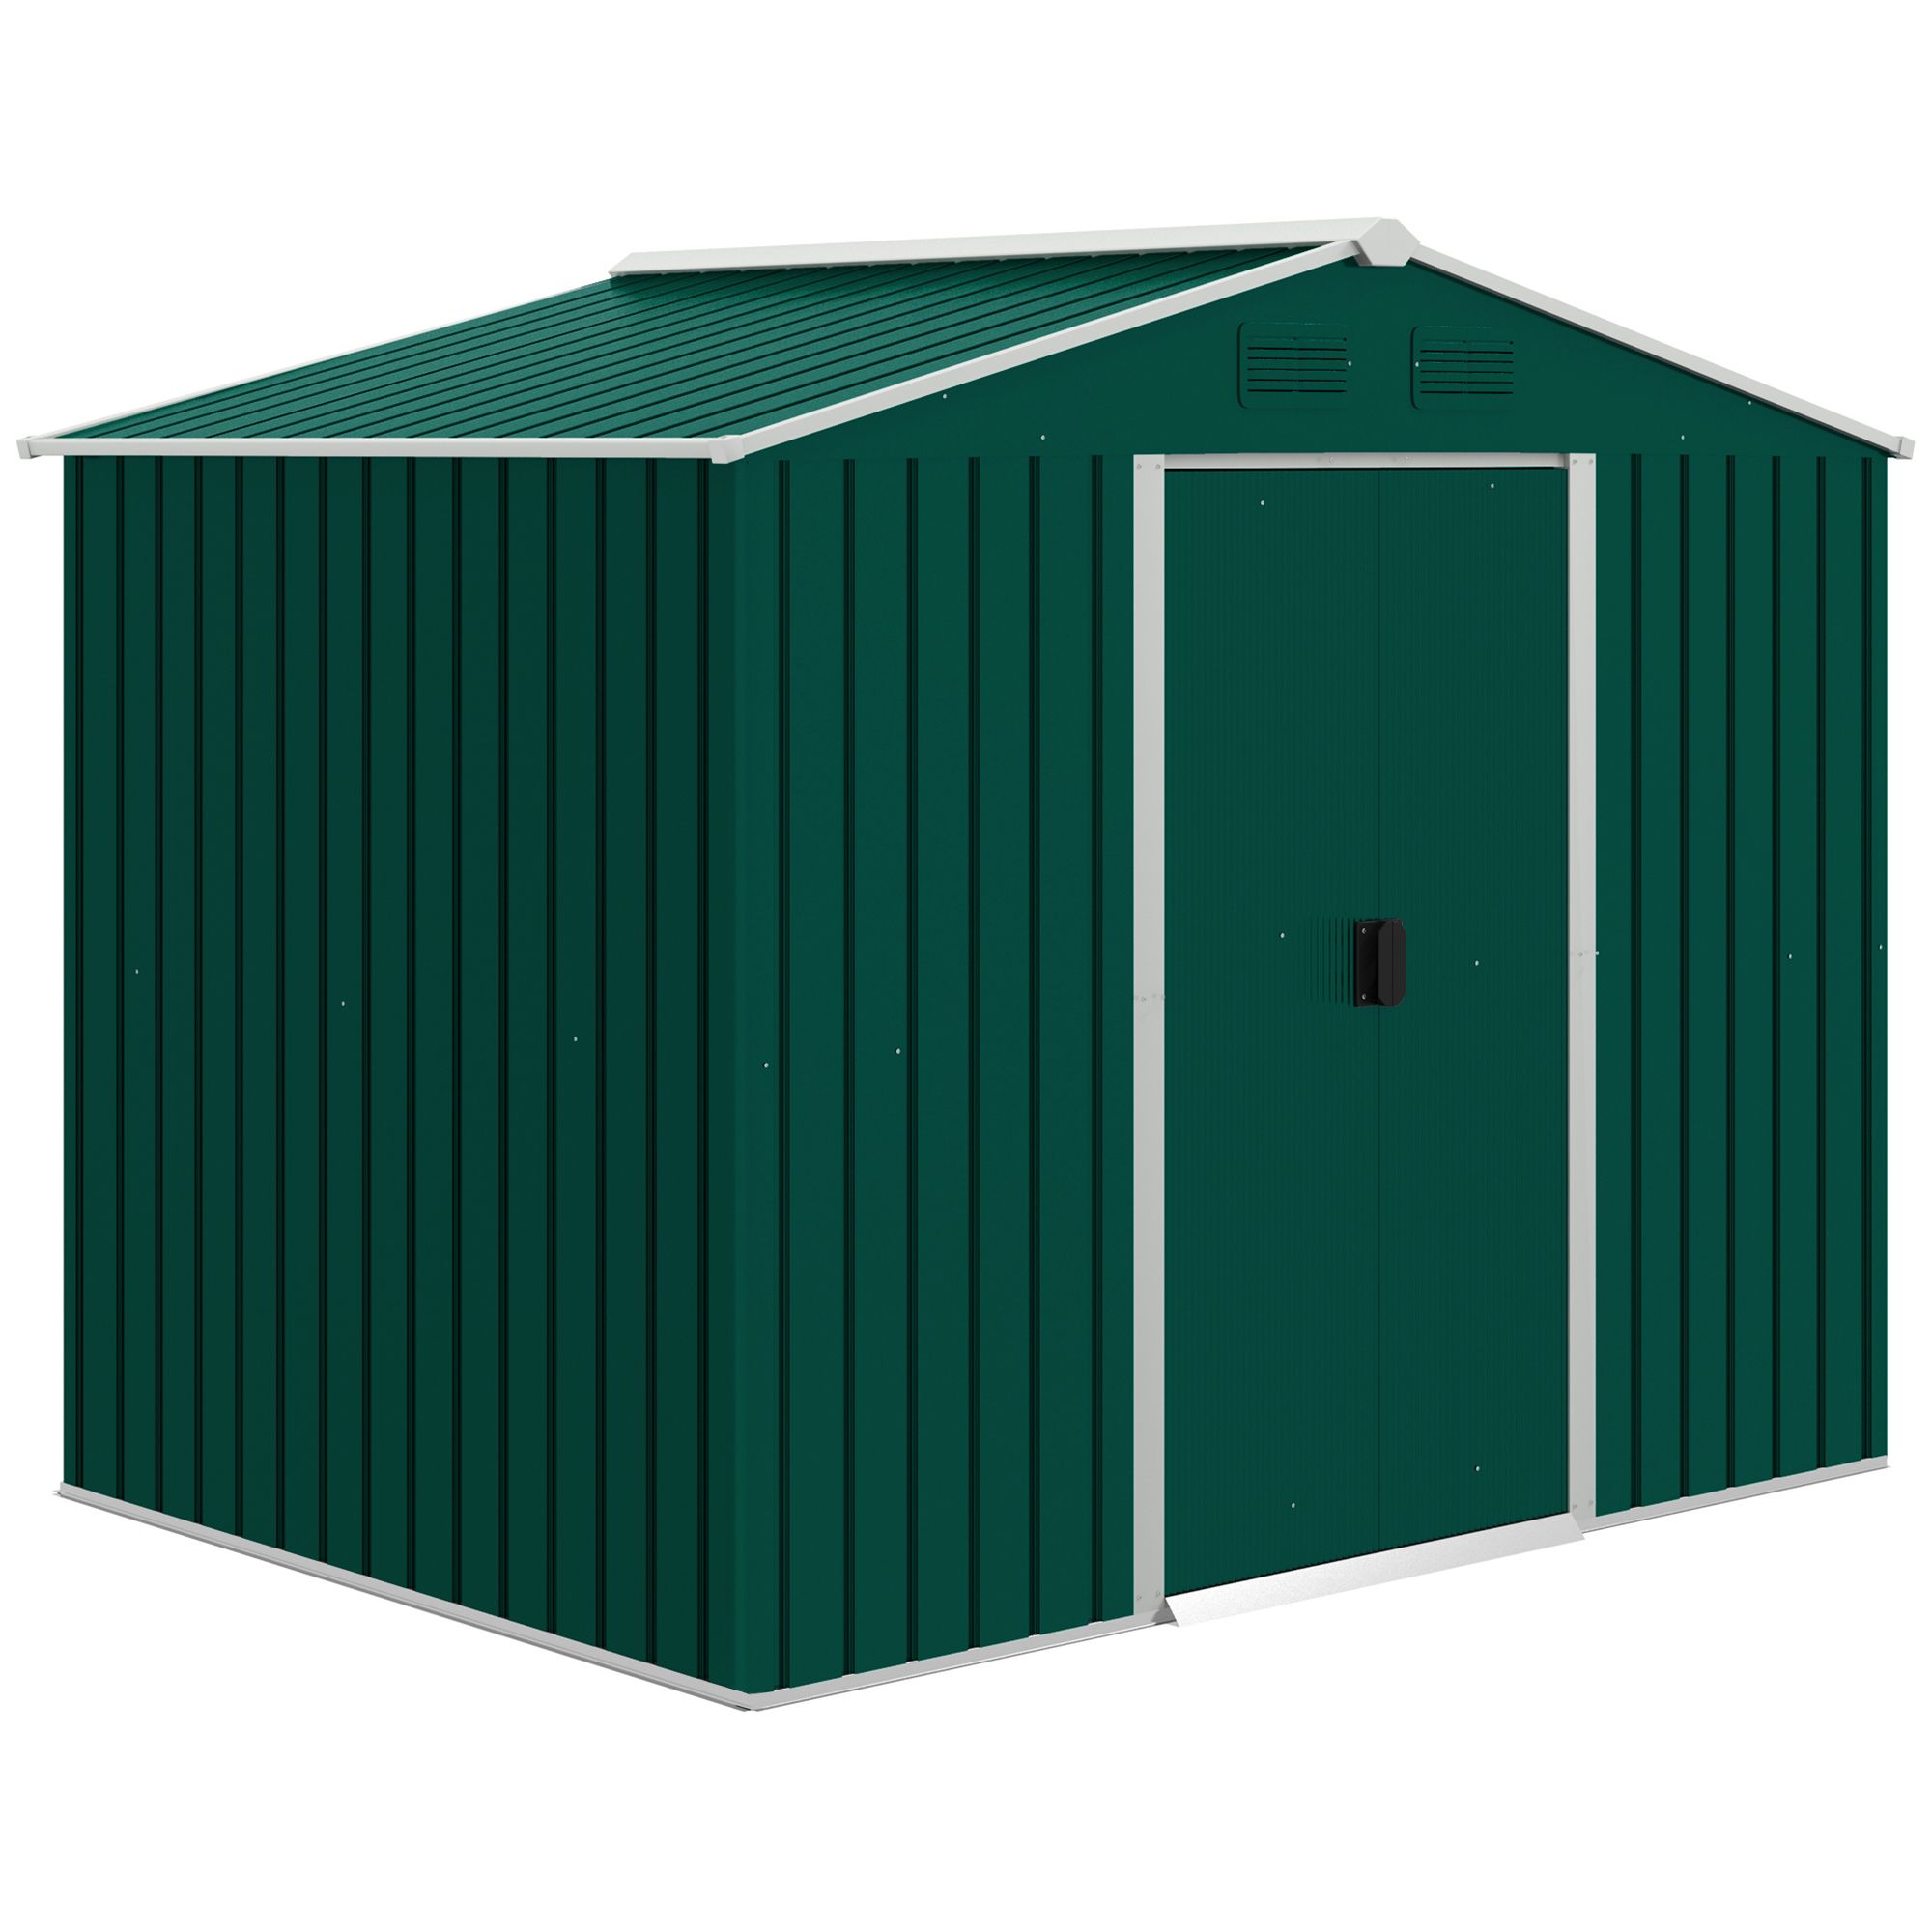 Outsunny 8 X 6 Ft Metal Garden Storage Shed Corrugated Steel Roofed Tool Box With Ventilation And Sliding Doors, Green